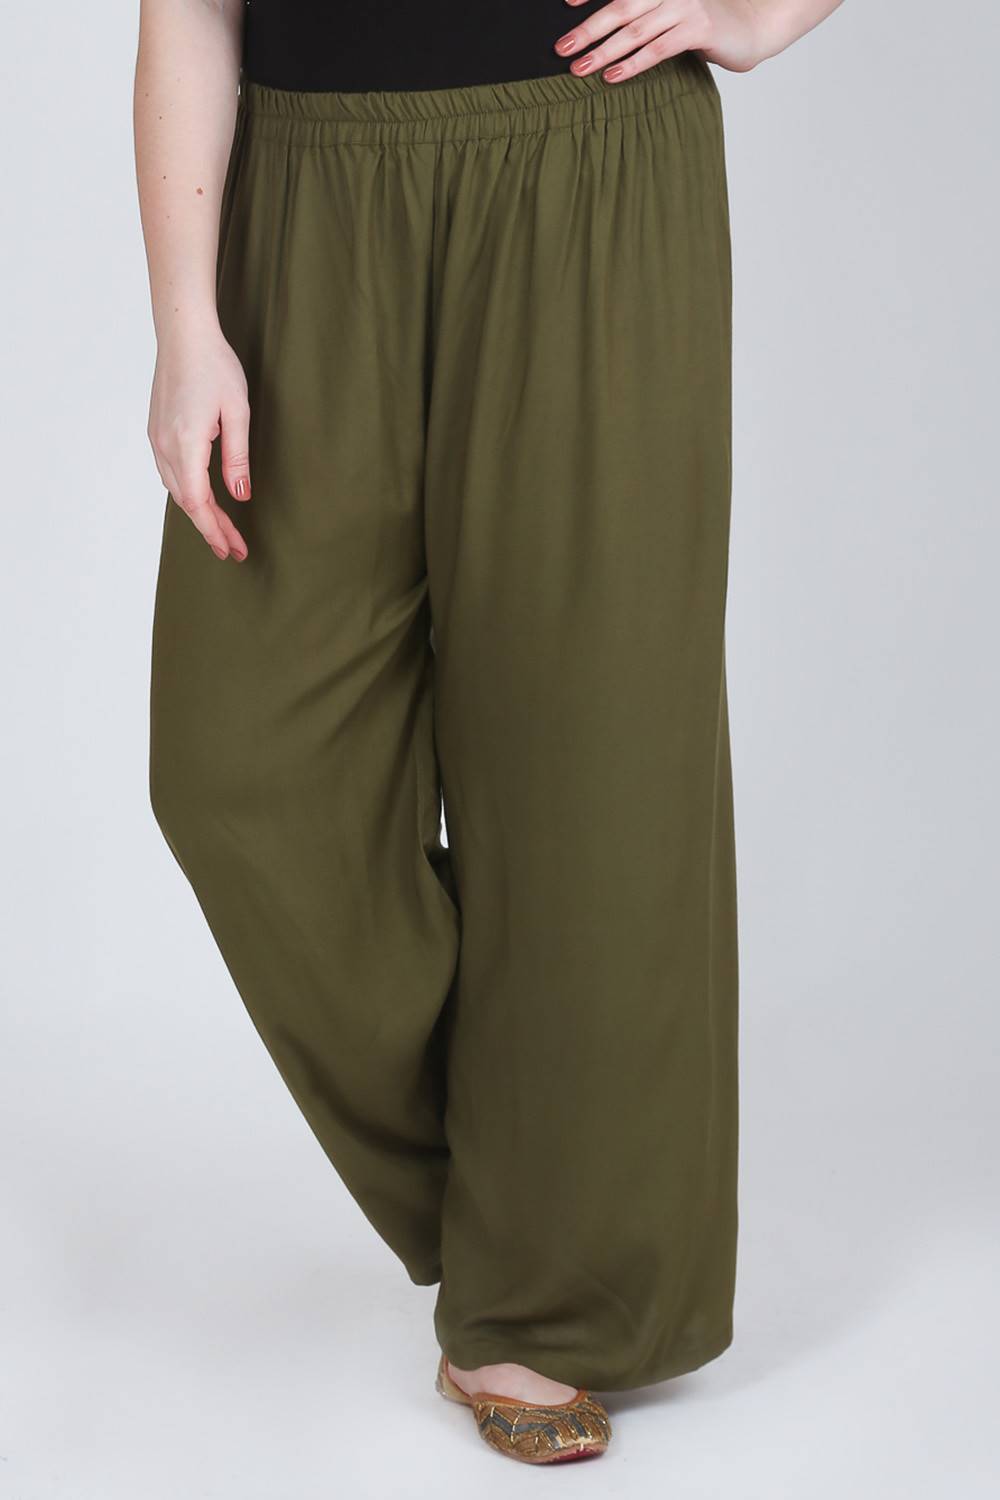 Aggregate more than 83 green palazzo pants super hot - in.eteachers